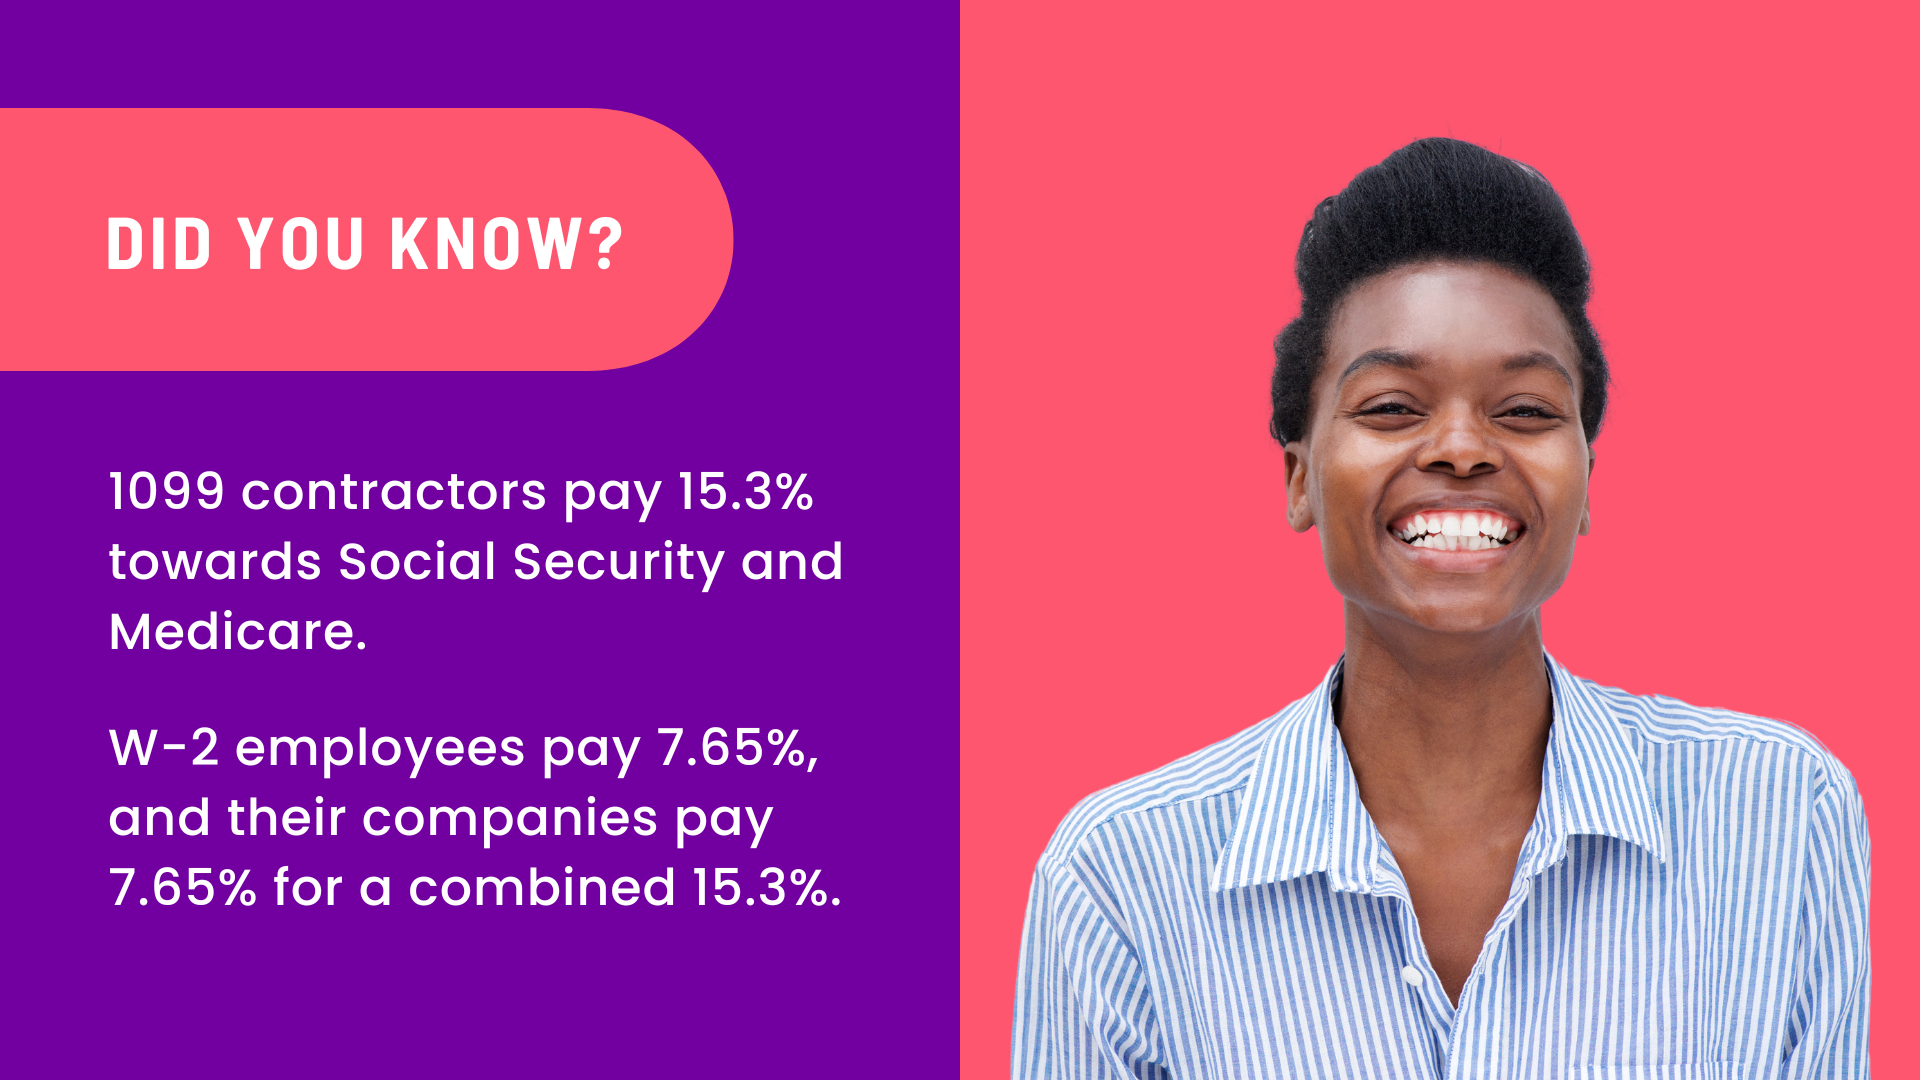 The image highlights that 1099 contractors pay 15.3% towards Social Security and Medicare (FICA). W-2 employees pay 7.65%, and their employers pay 7.65% for a combined 15.3%.